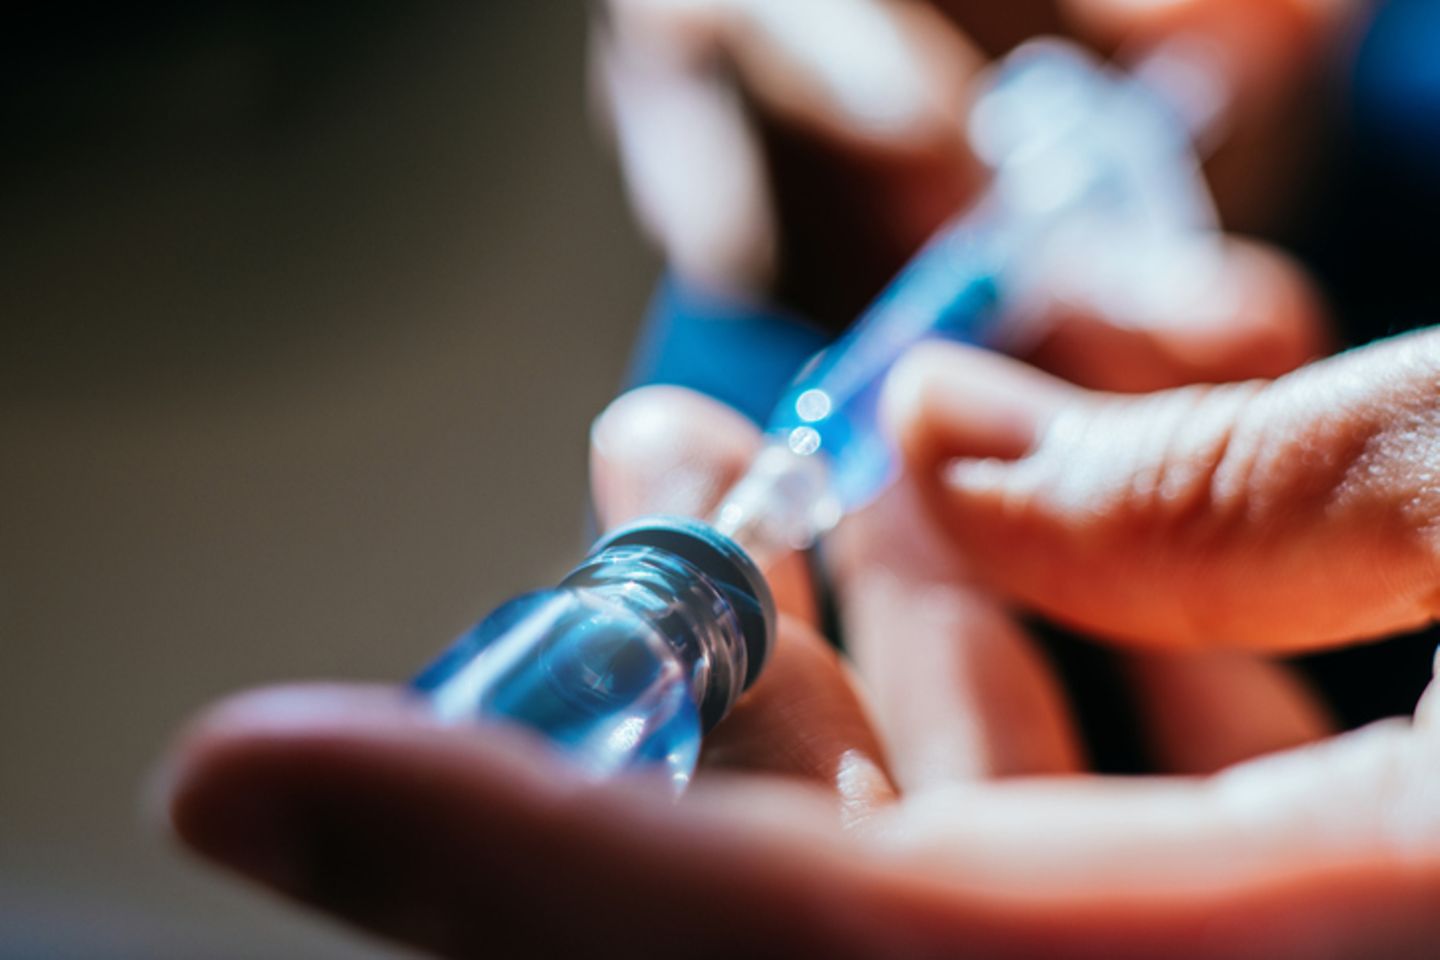 Two hands hold a syringe and a medical vial containing a blue fluid